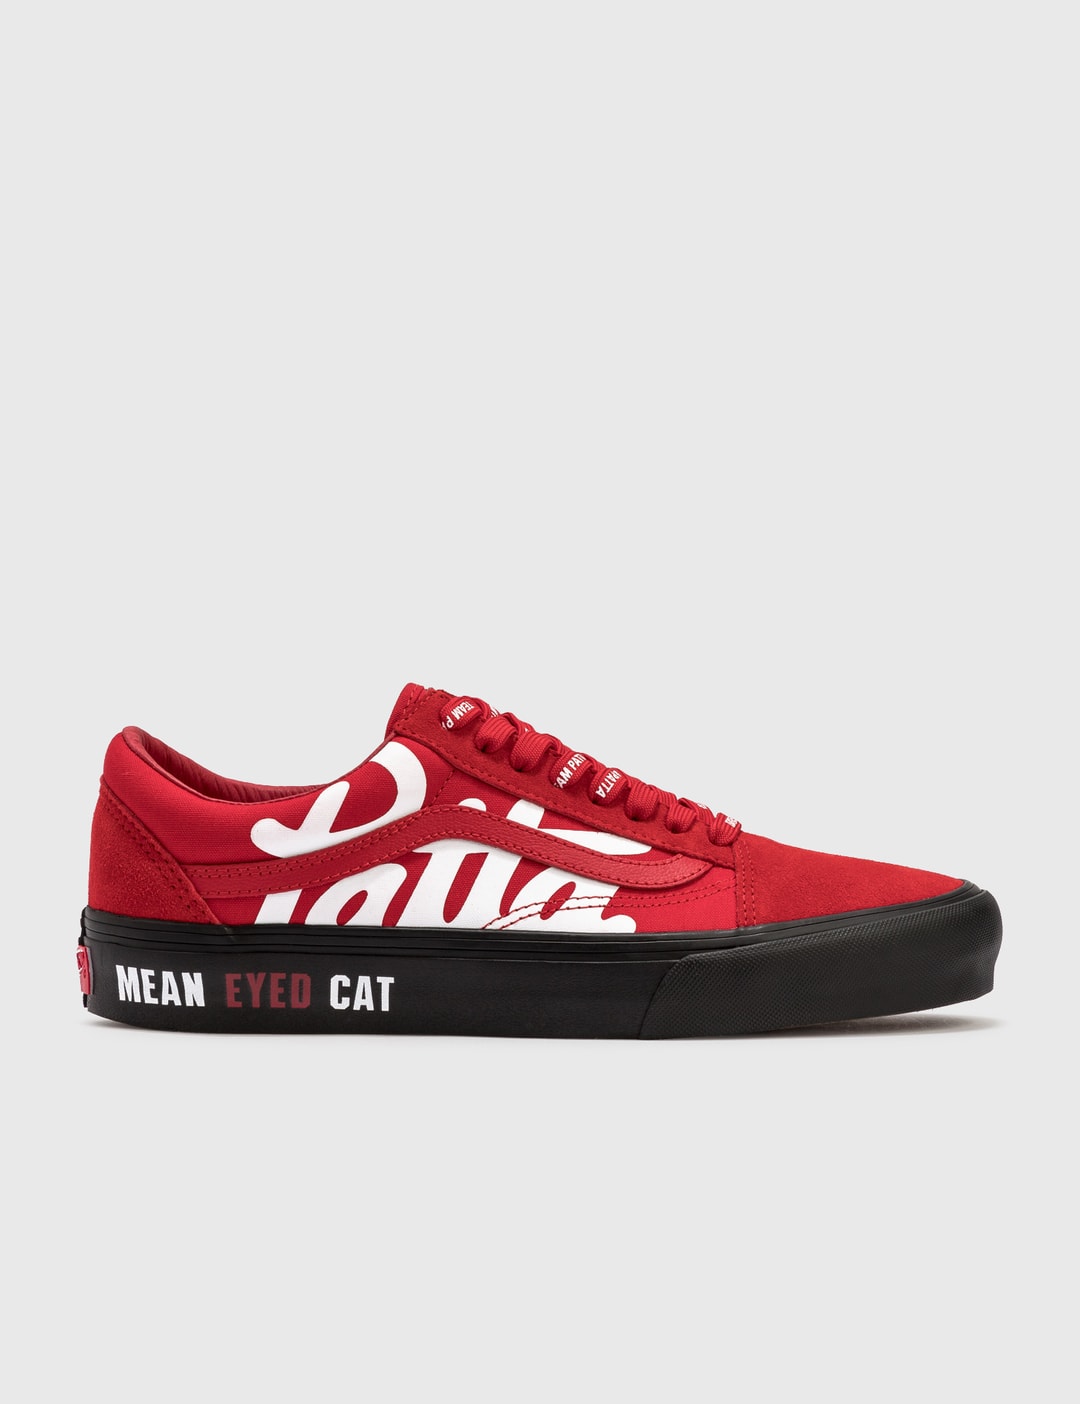 Vans Vans x Patta Old Skool VLT LX HBX - Globally Curated Fashion and Lifestyle by